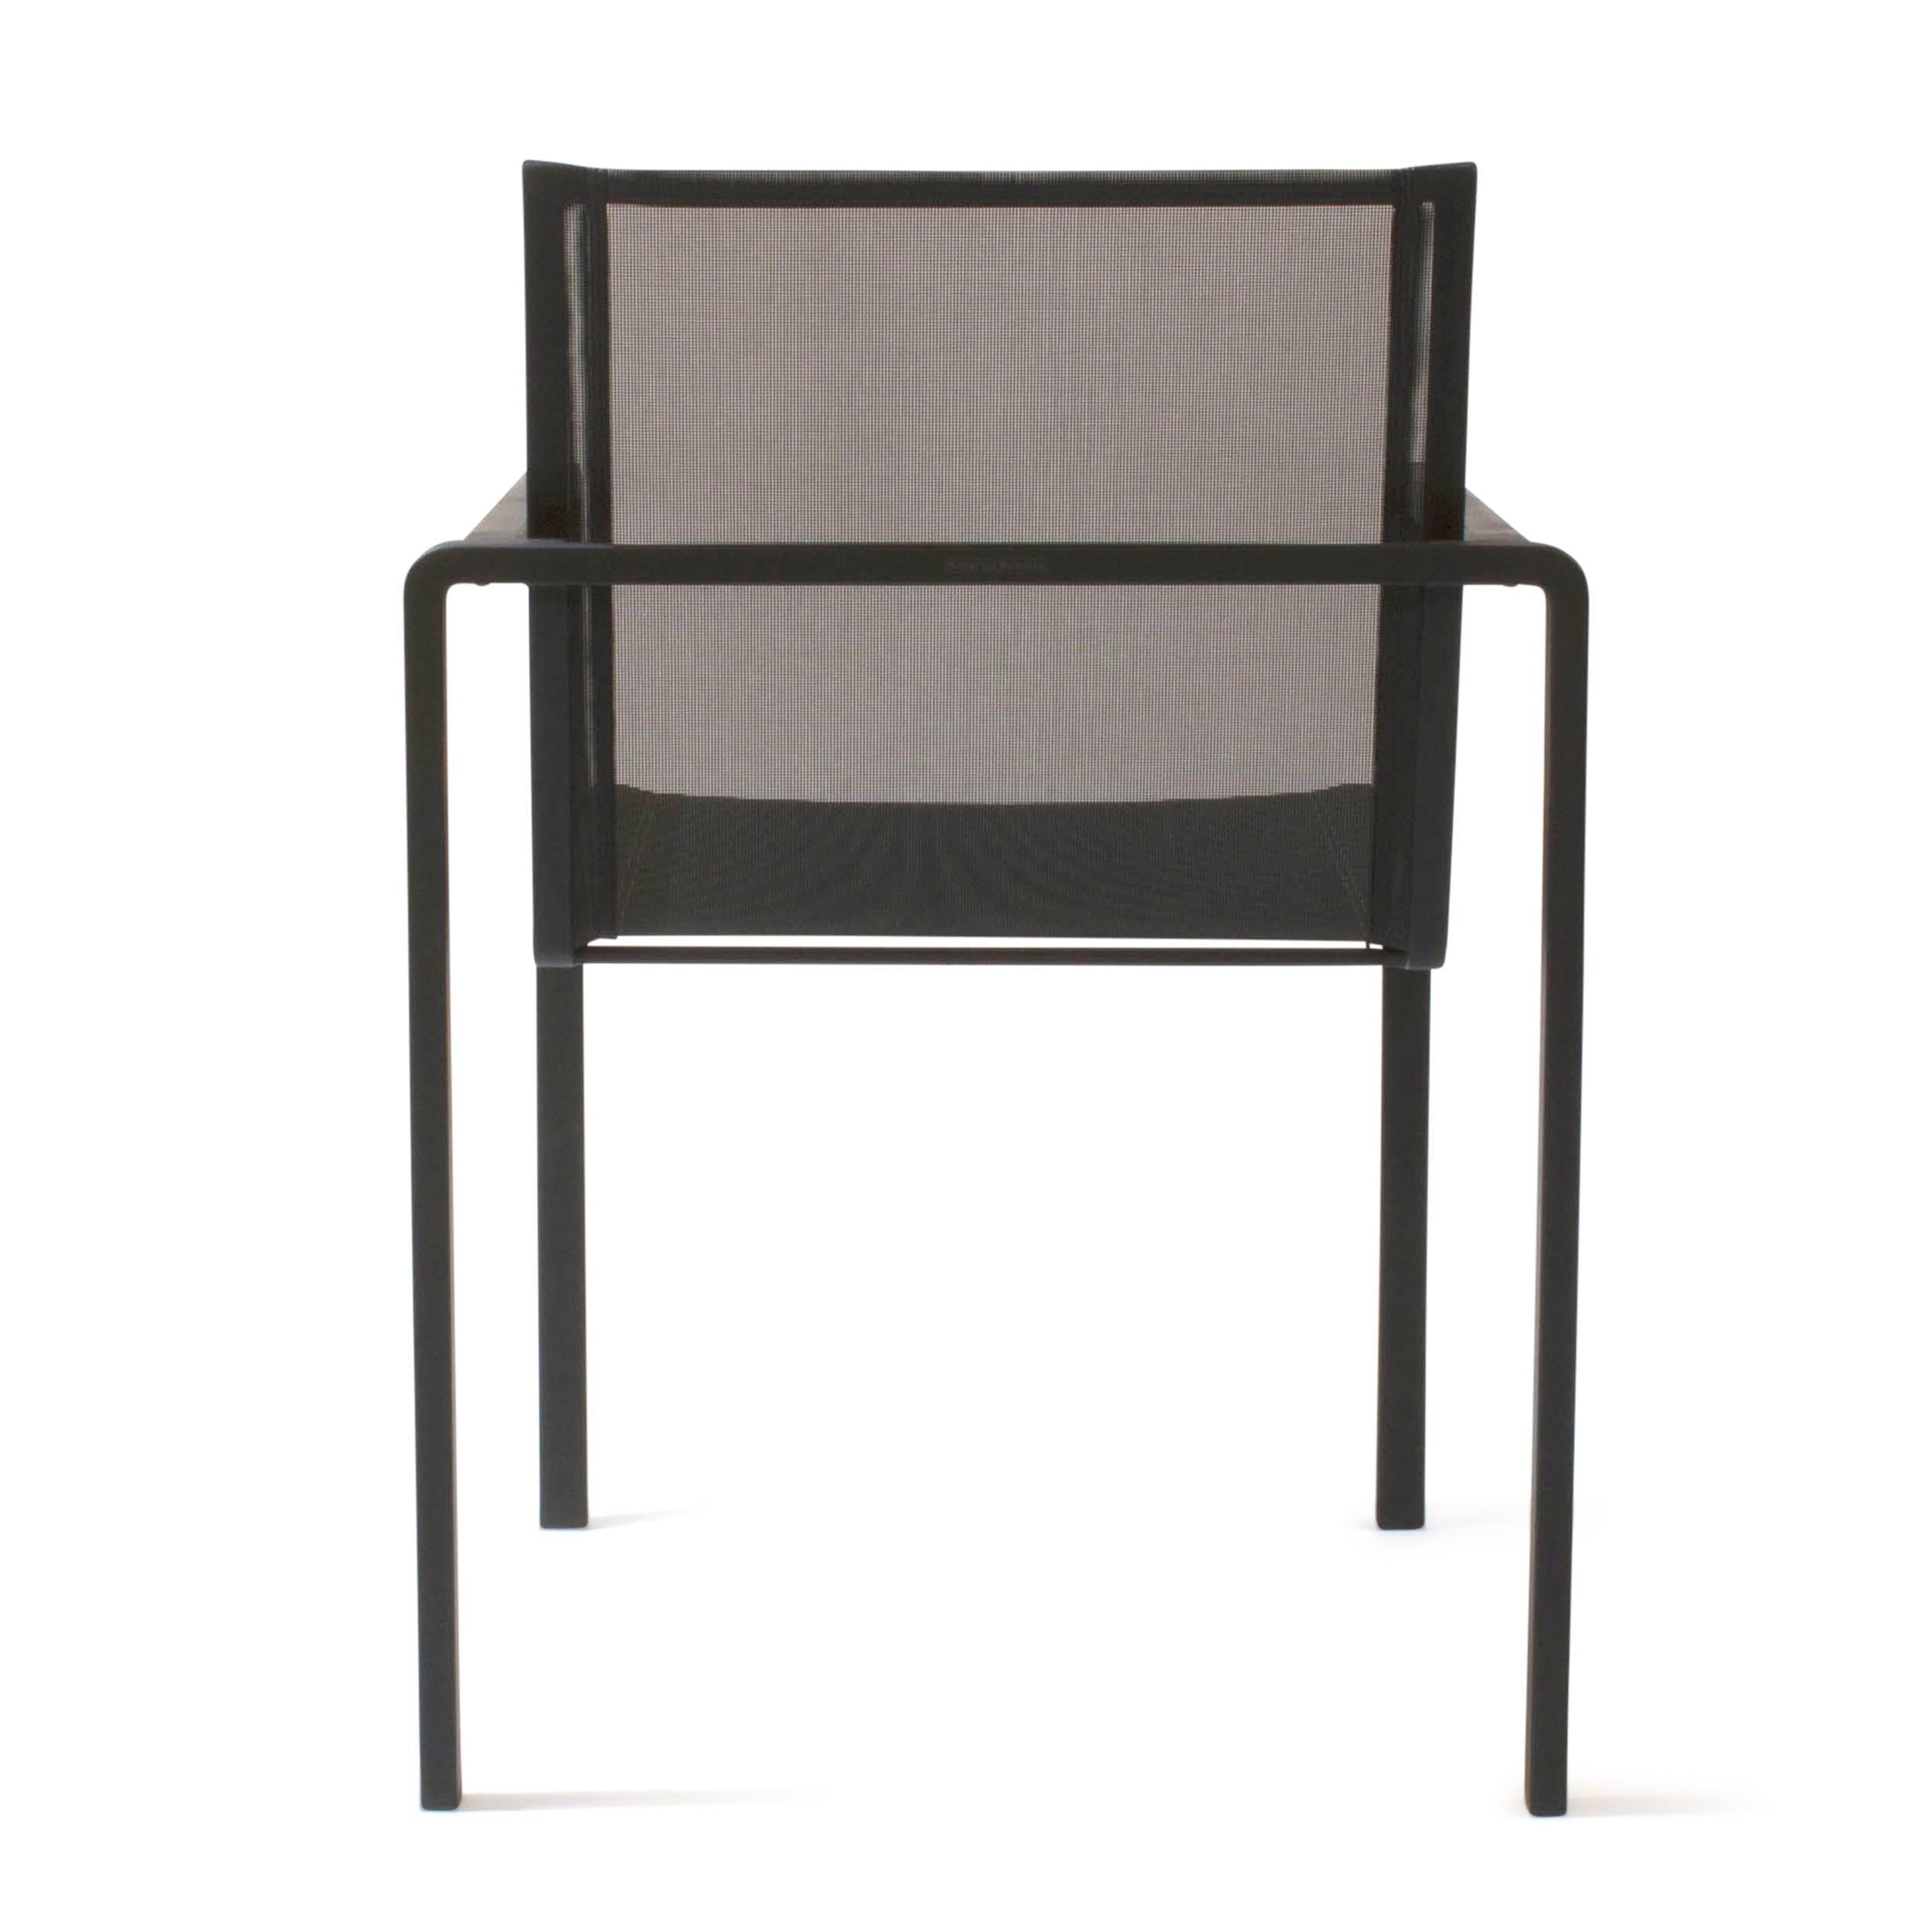 Black Alura 55 Outdoor Dining Armchair by Royal Botania, Belgium In Good Condition For Sale In Brooklyn, NY